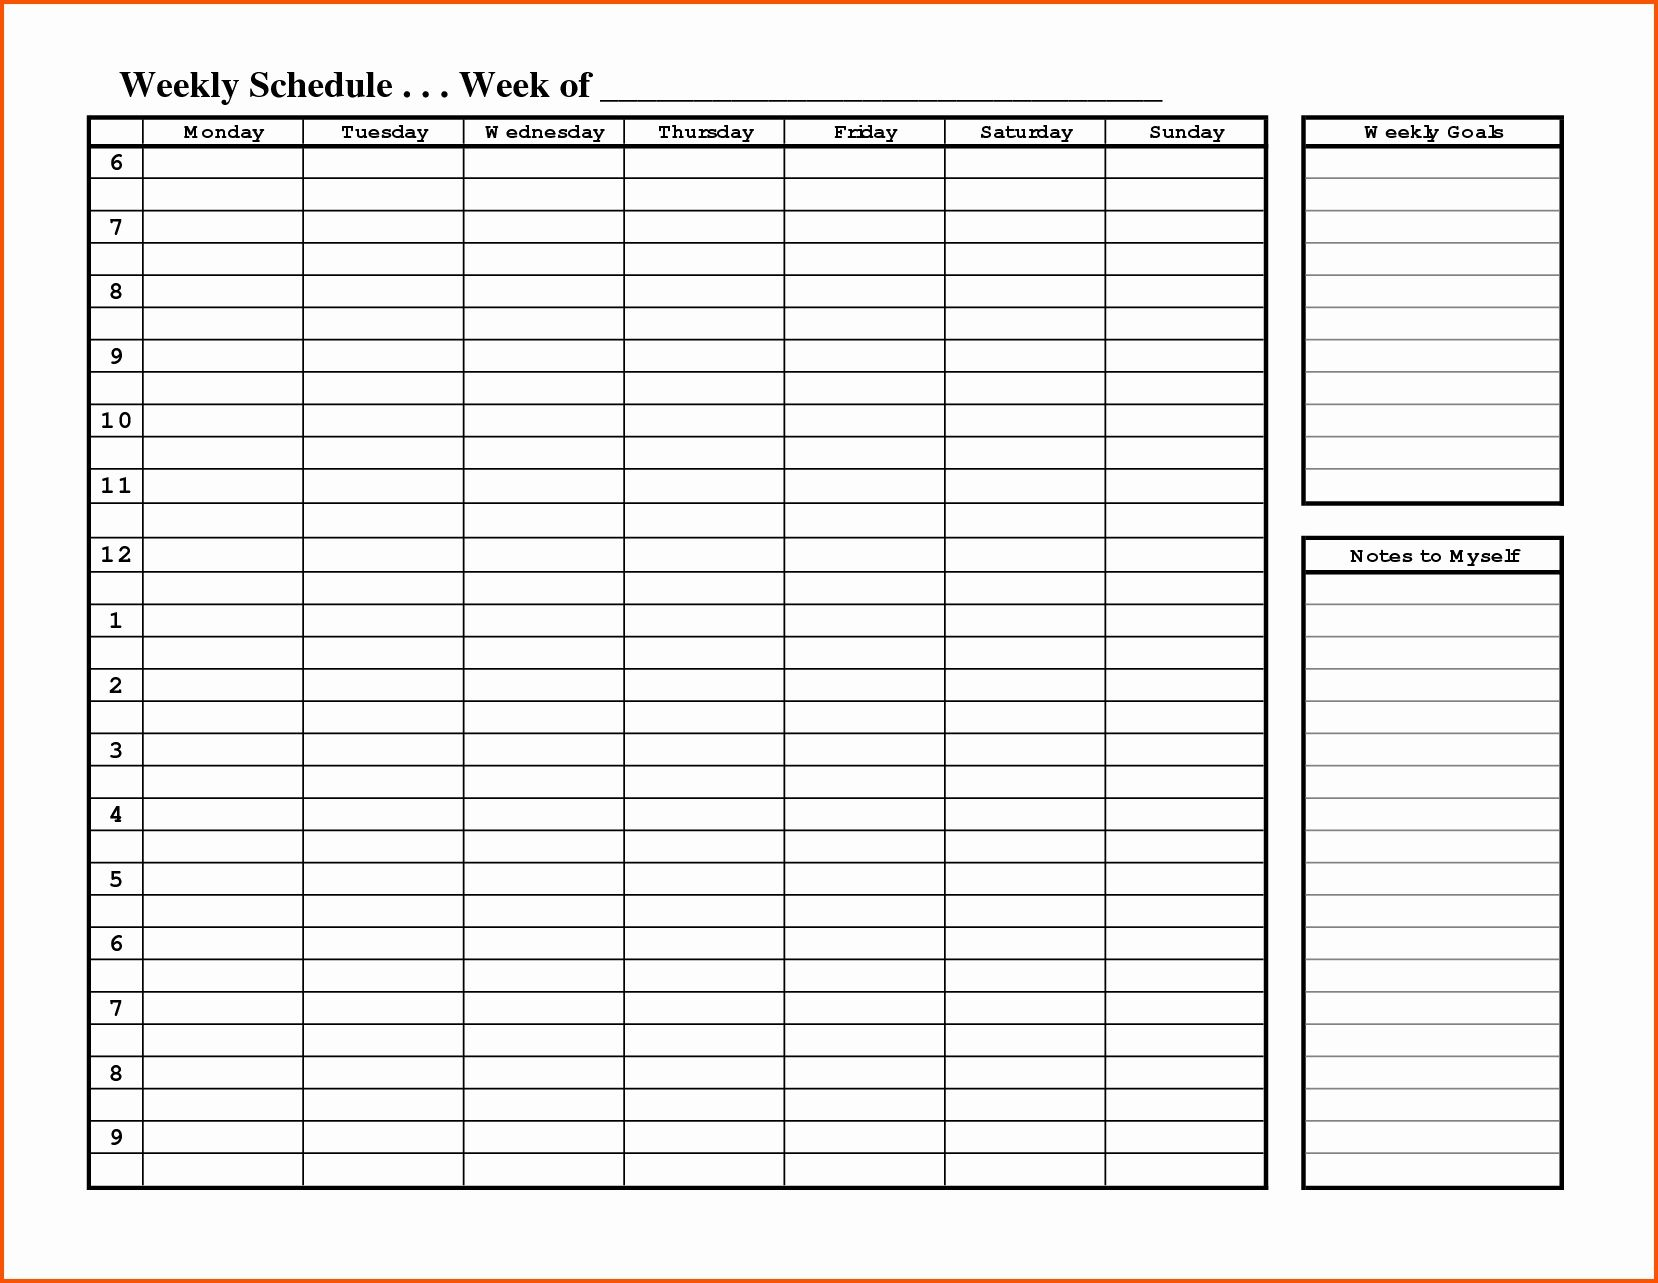 Weekly Hourly Planner Template Word | Daily Calendar for Weekly Hourly Calendar